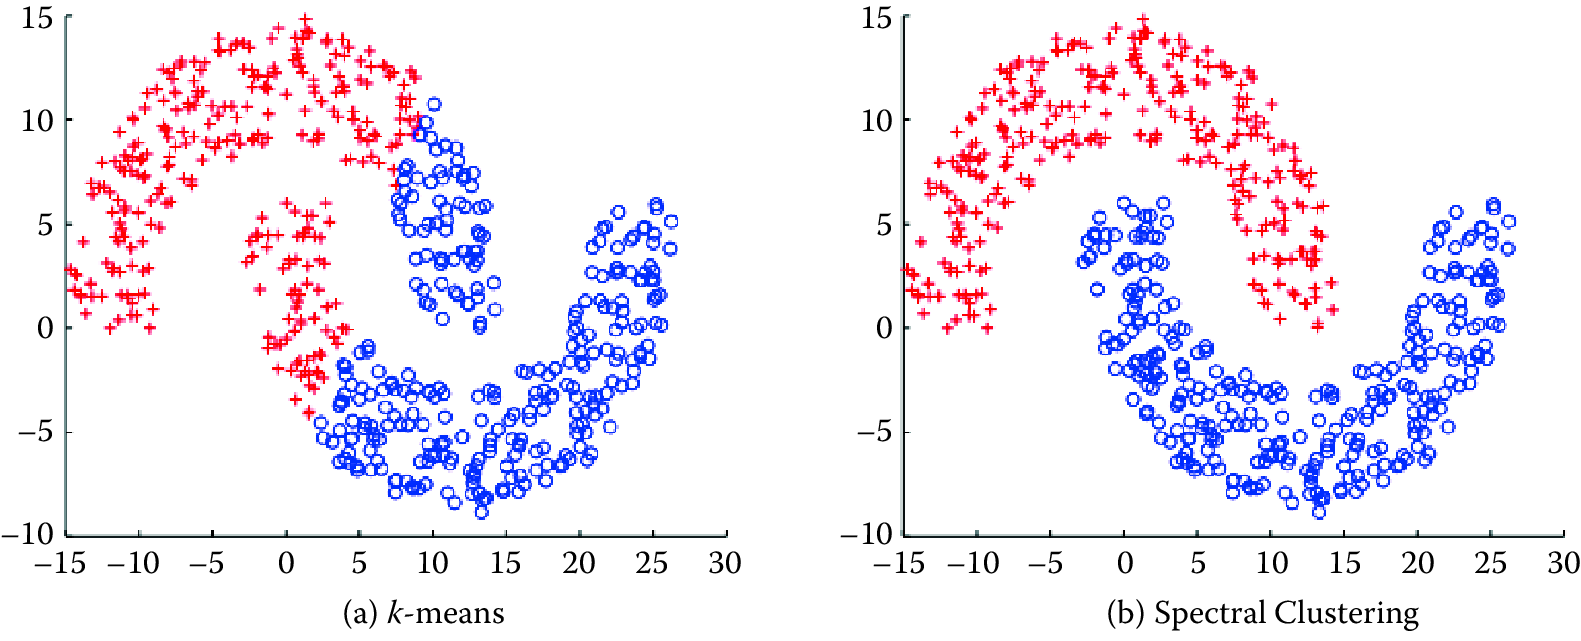 The same data set can produce drastically different clusters: (a) k-means; (b) spectral clustering